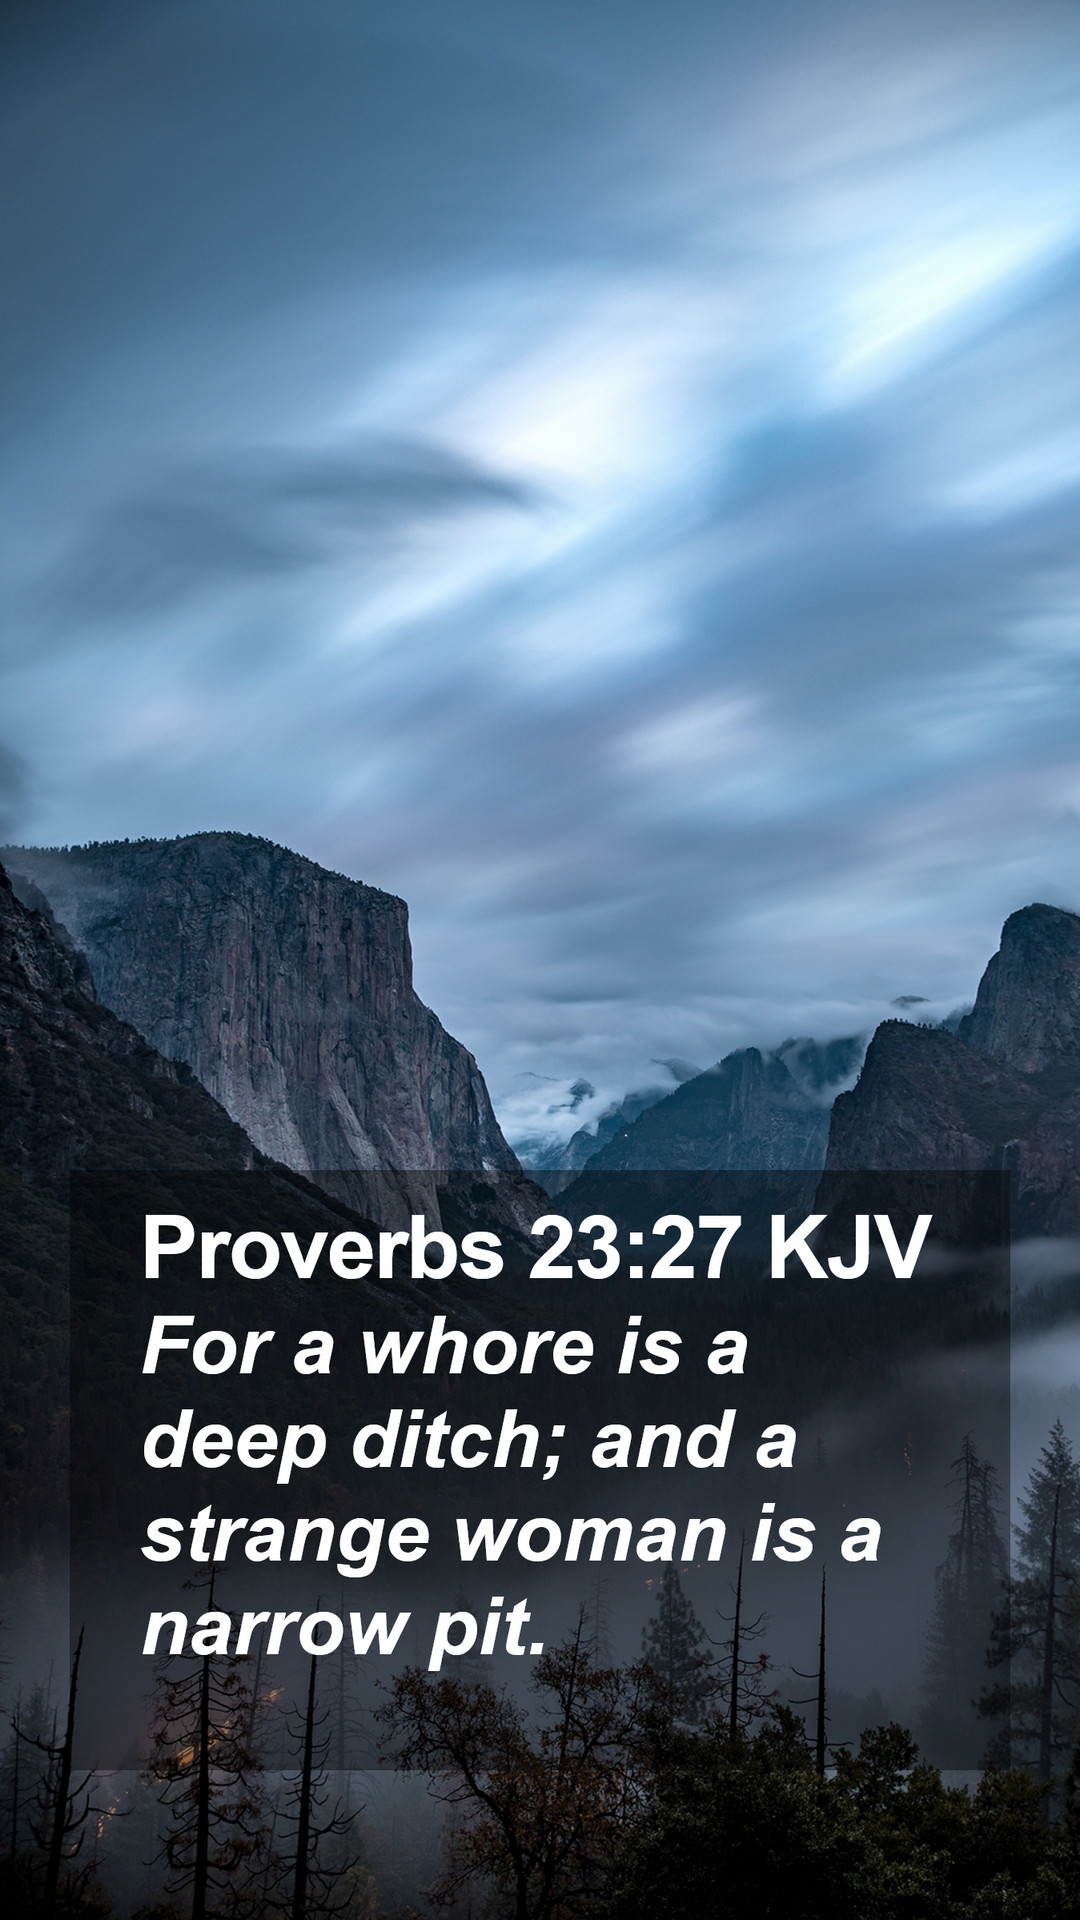 Proverbs Kjv Mobile Phone Wallpaper For A Whore Is Deep